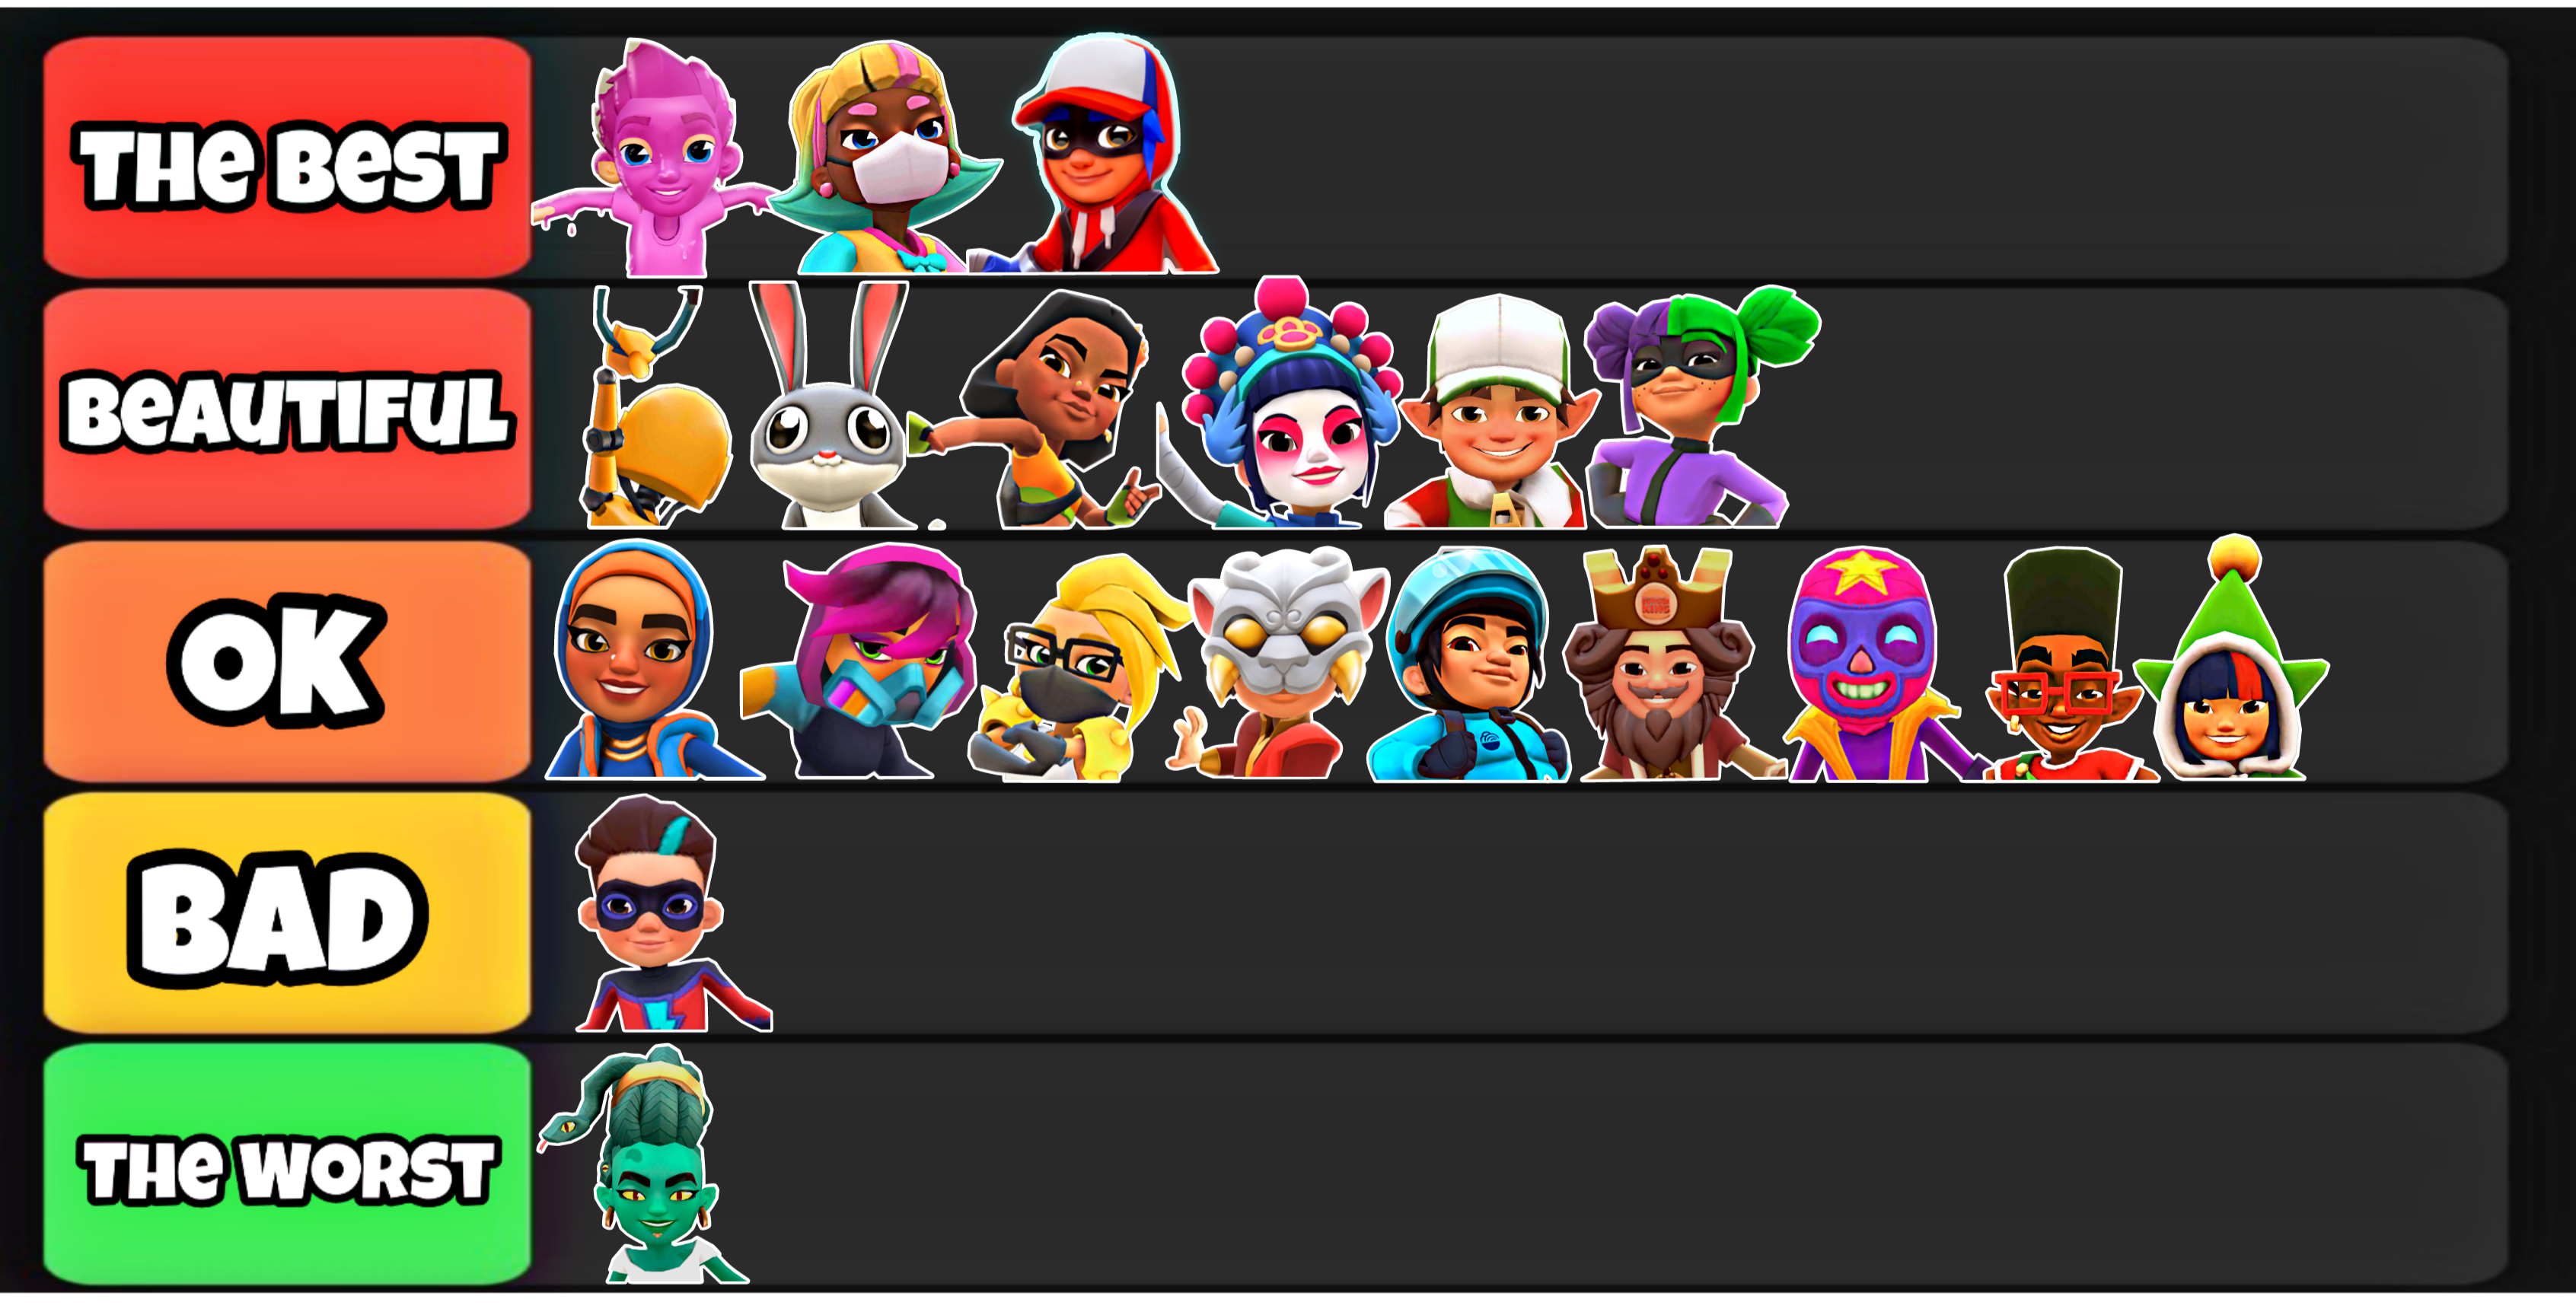 Create a Subway surfers outfits Tier List - TierMaker